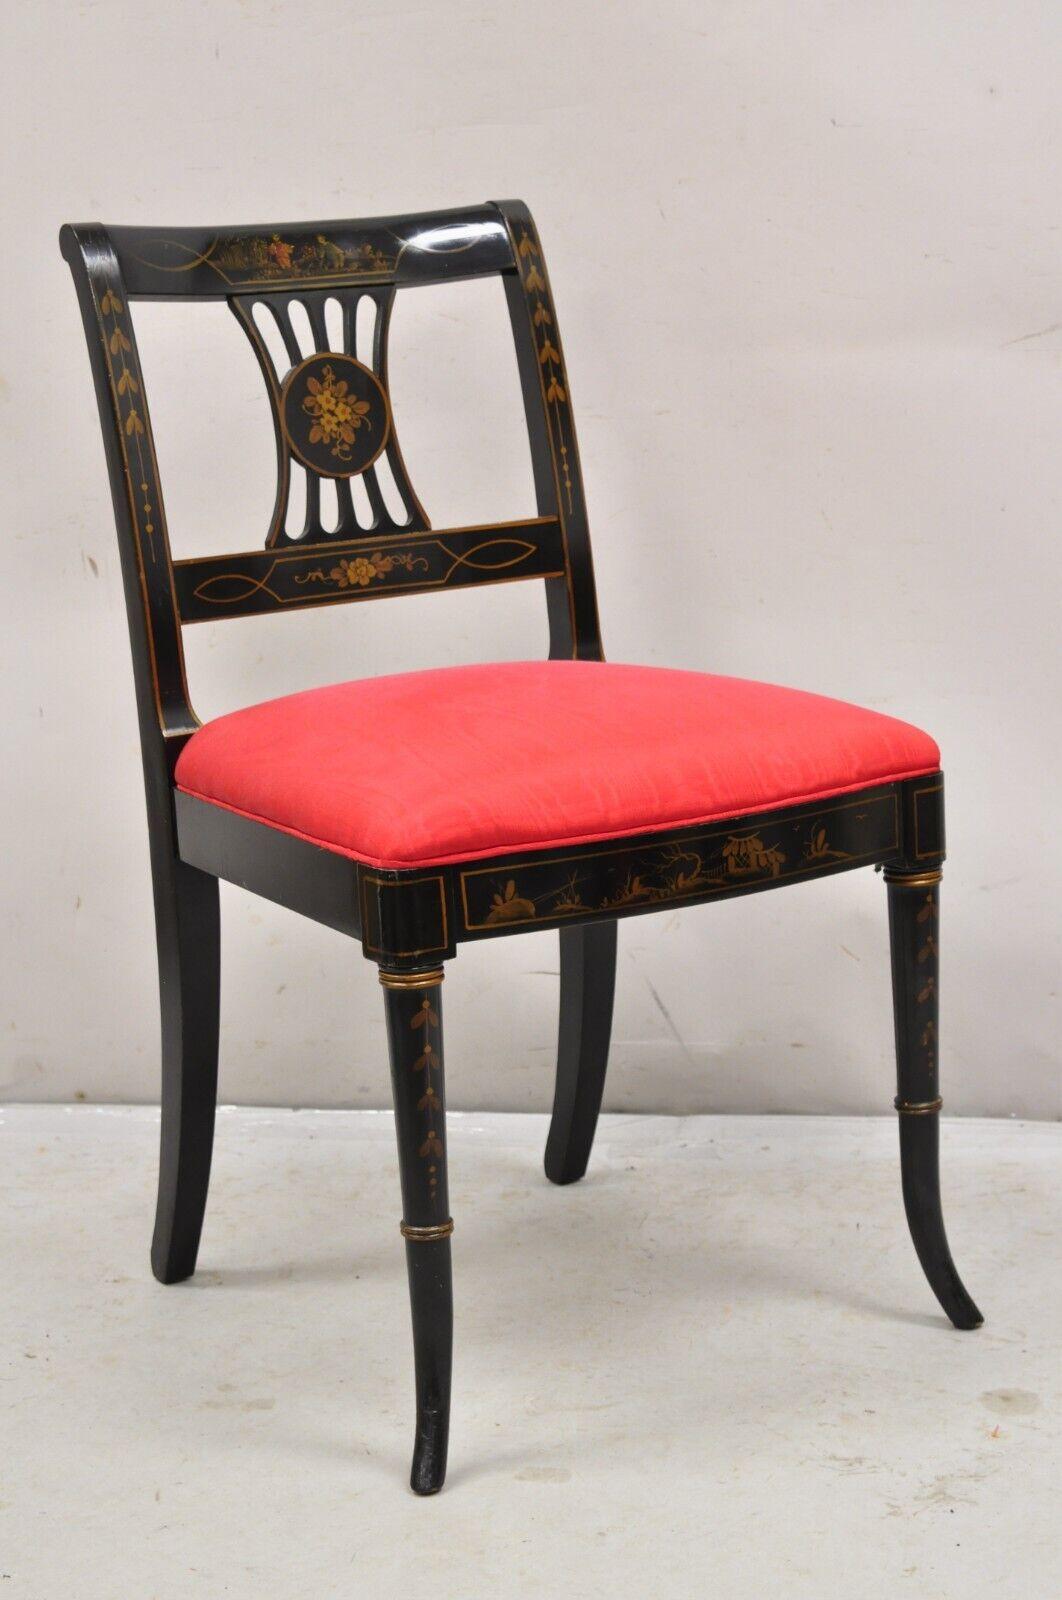 Set of 6 Vintage Chinoiserie English Regency Style Black Hand Painted Dining Chairs. Believed to be by Union National Furniture Co.
Set includes 6 side chairs with hand painted details, saber legs, red upholstered seats, very nice quality set. Circa